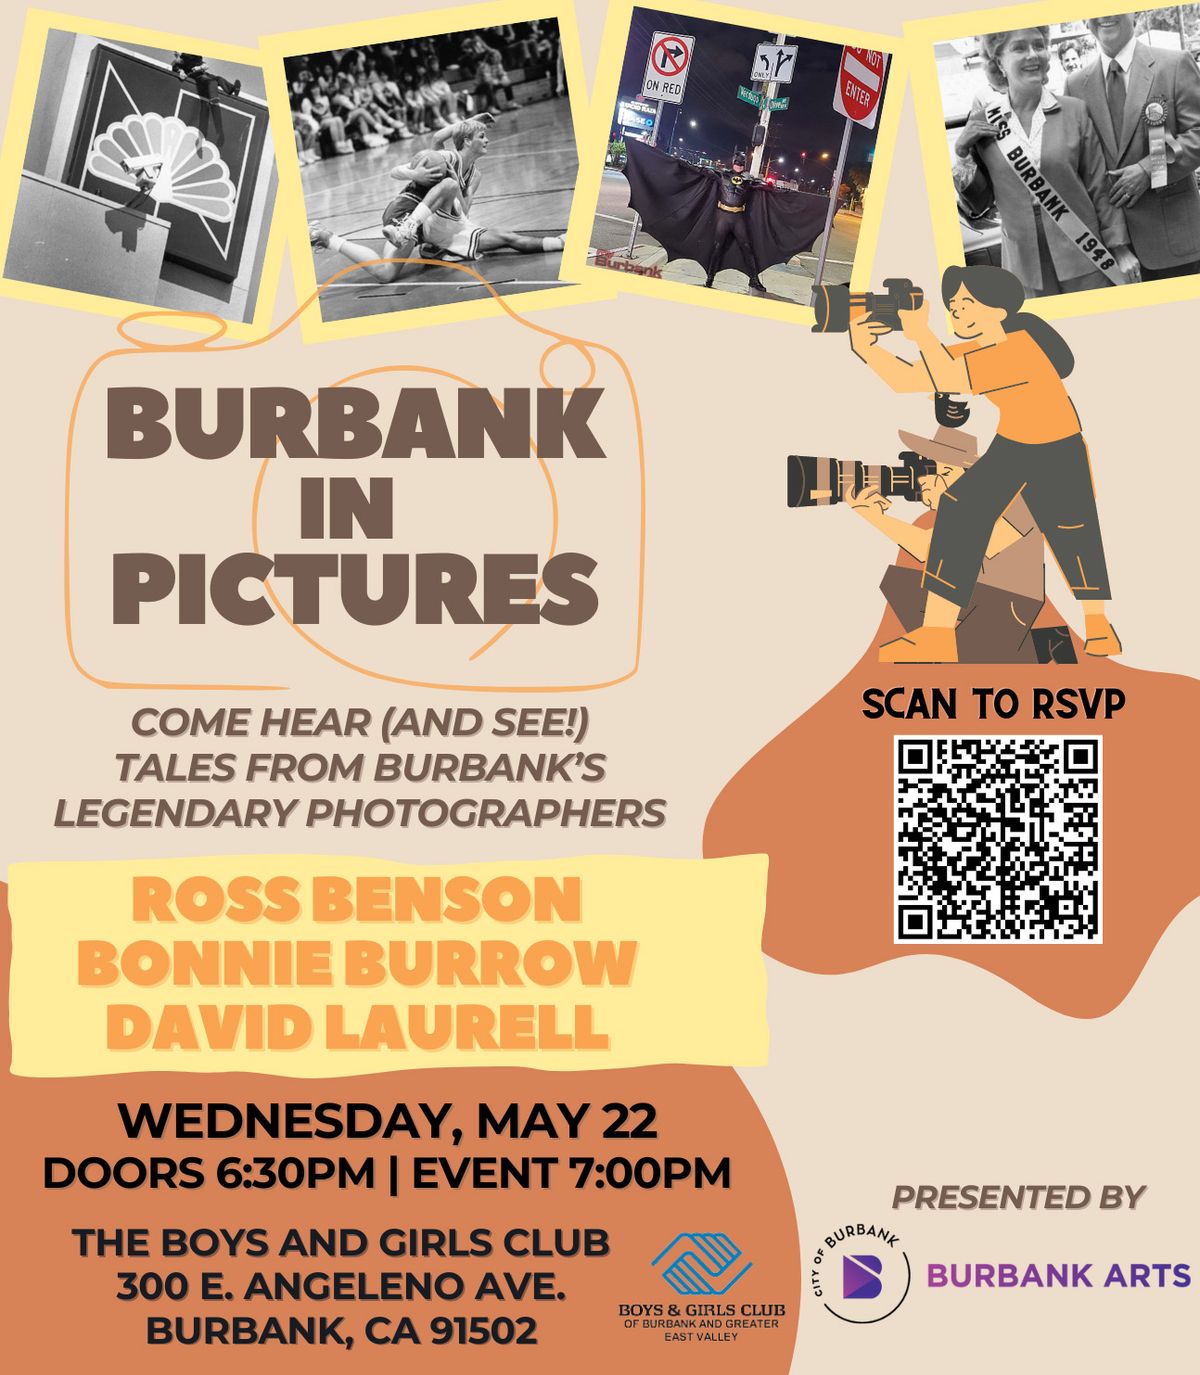 Burbank in Pictures: Featuring Ross Benson, Bonnie Burrow & David Laurell